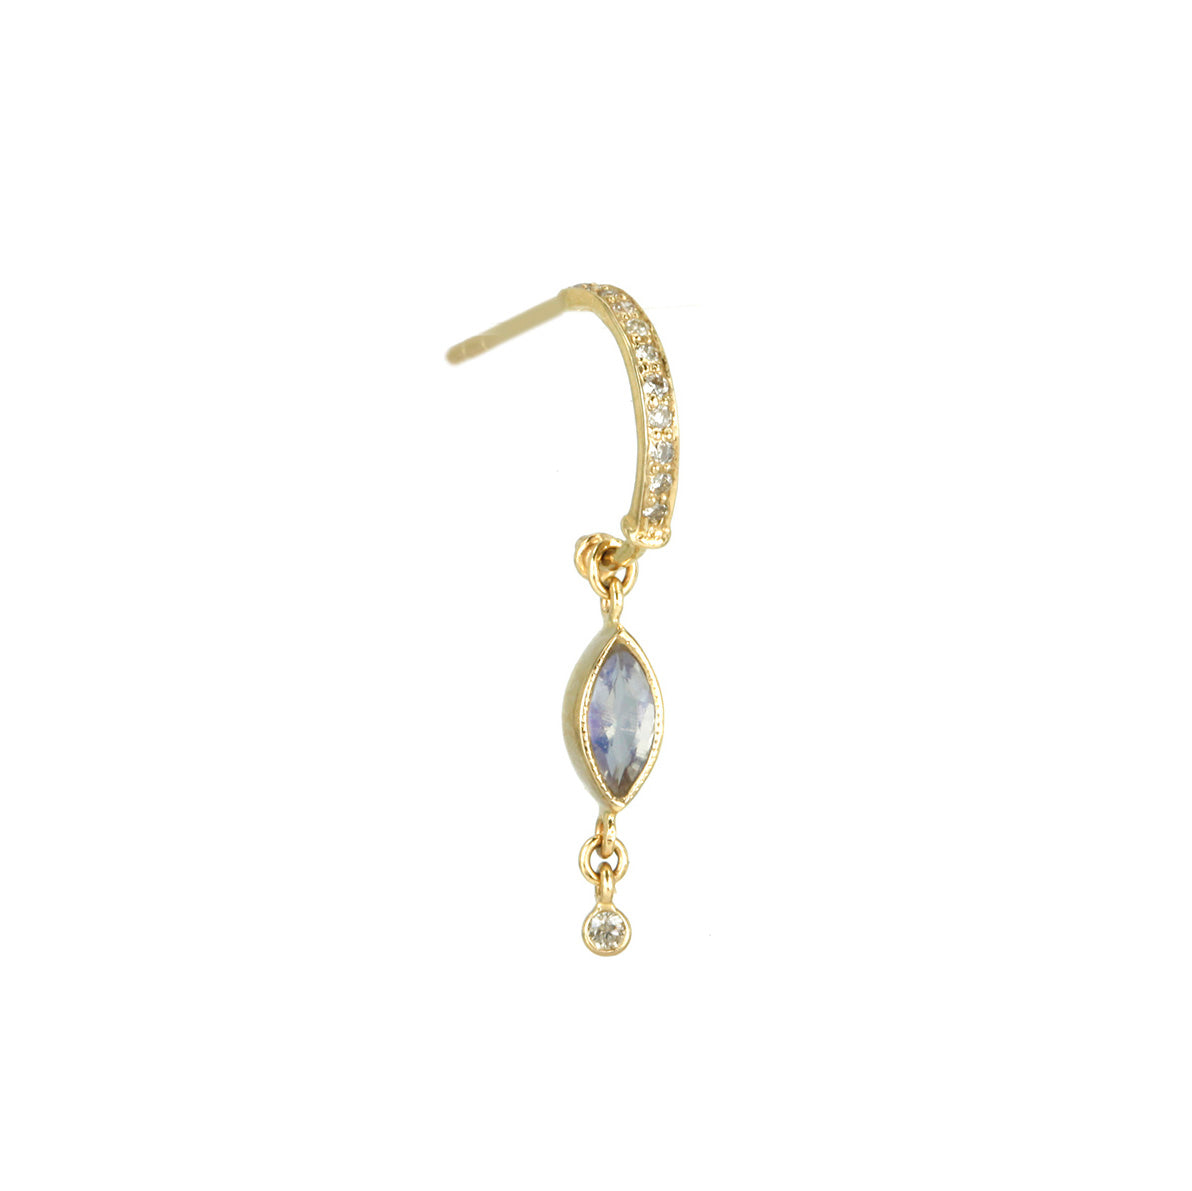 14K Gold Pave Diamond Hoop Earring with Marquise Moonstone Drop